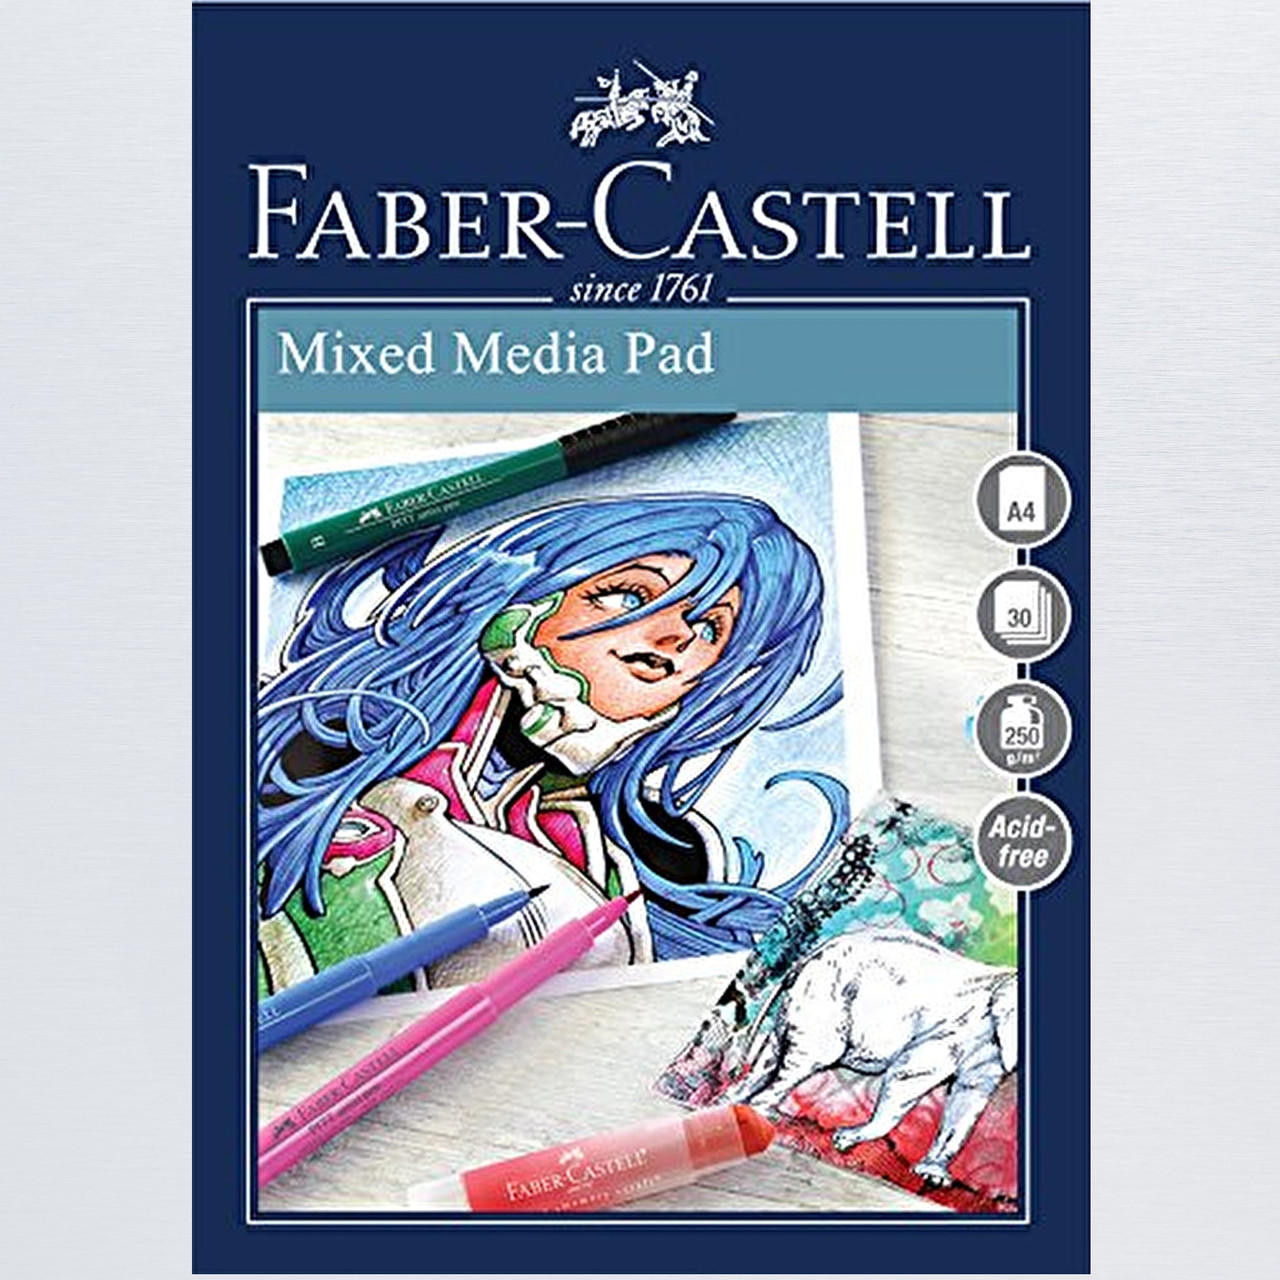 Faber-Castell Creative Studio Mixed Media Spiral Pad